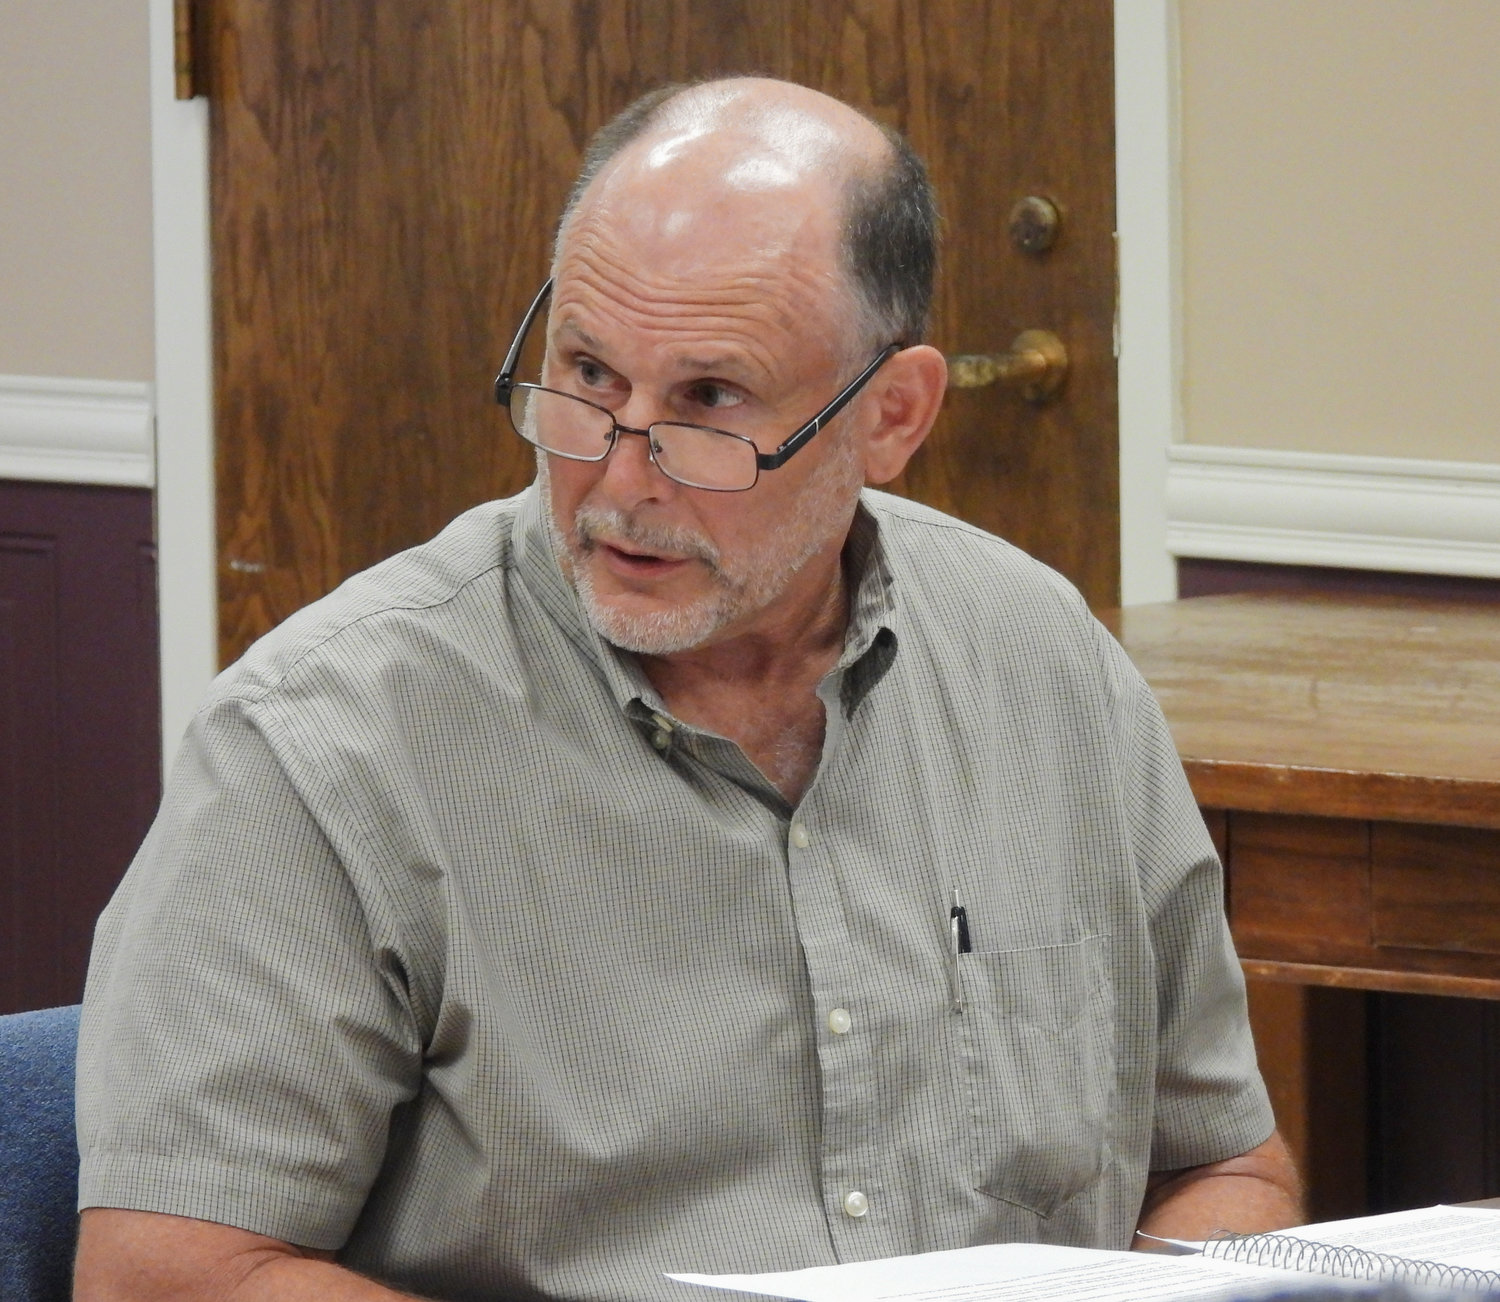 Board Member Roger Potenski speaks at the Westmoreland Joint Zoning Board of Appeals and Planning Board's meeting on Tuesday, Aug. 2 where SunEast Skyline Solar's project around the intersection of Griffin and Valley View Roads within the towns of Westmoreland and Kirkland was discussed.